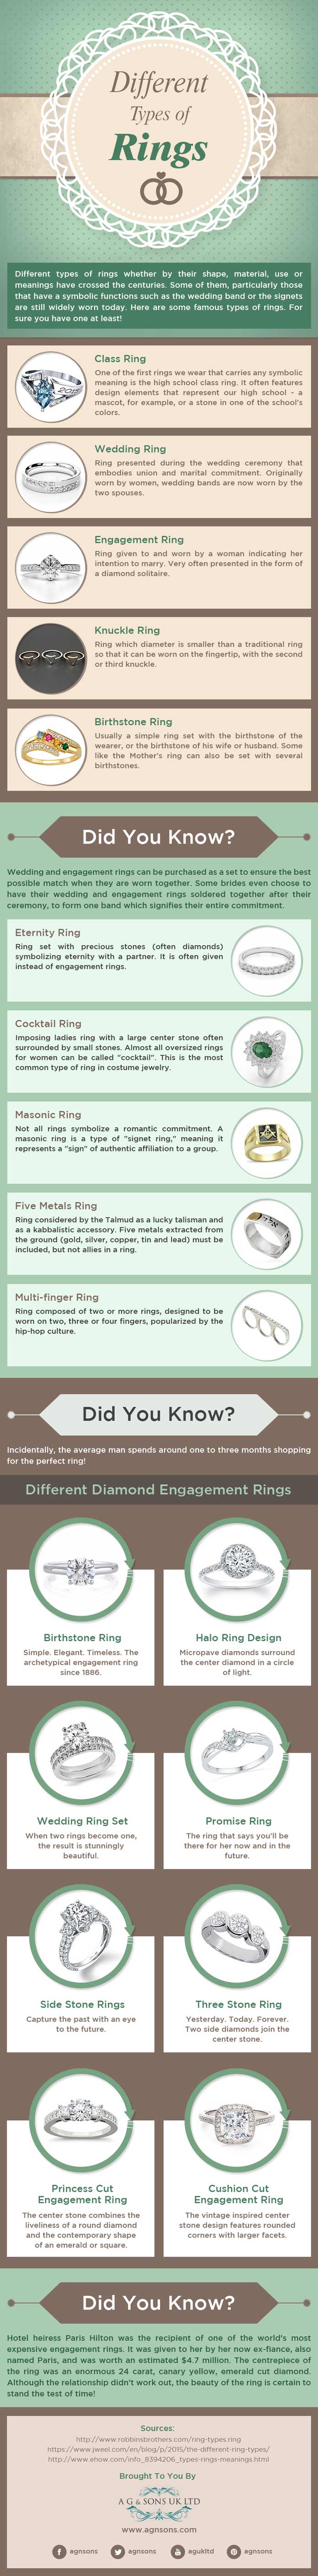 Different Types of Rings